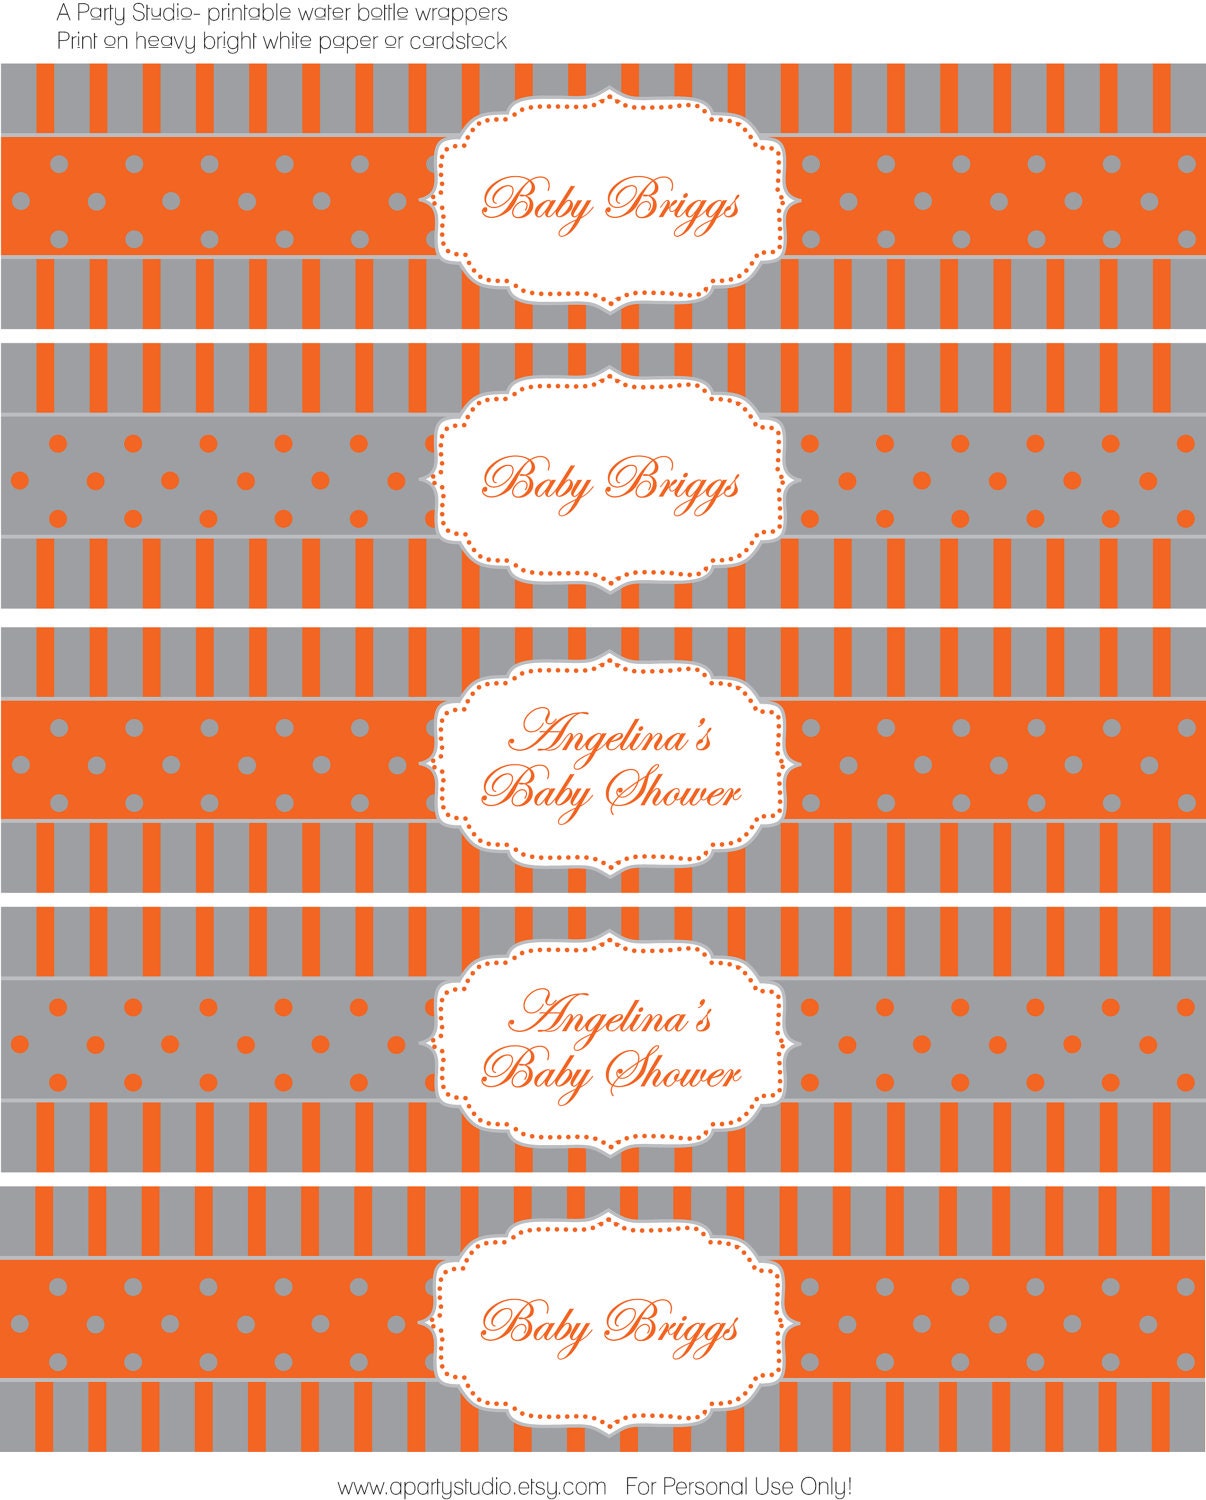 Pumpkin Orange and Grey Water Bottle Wrappers- print your own